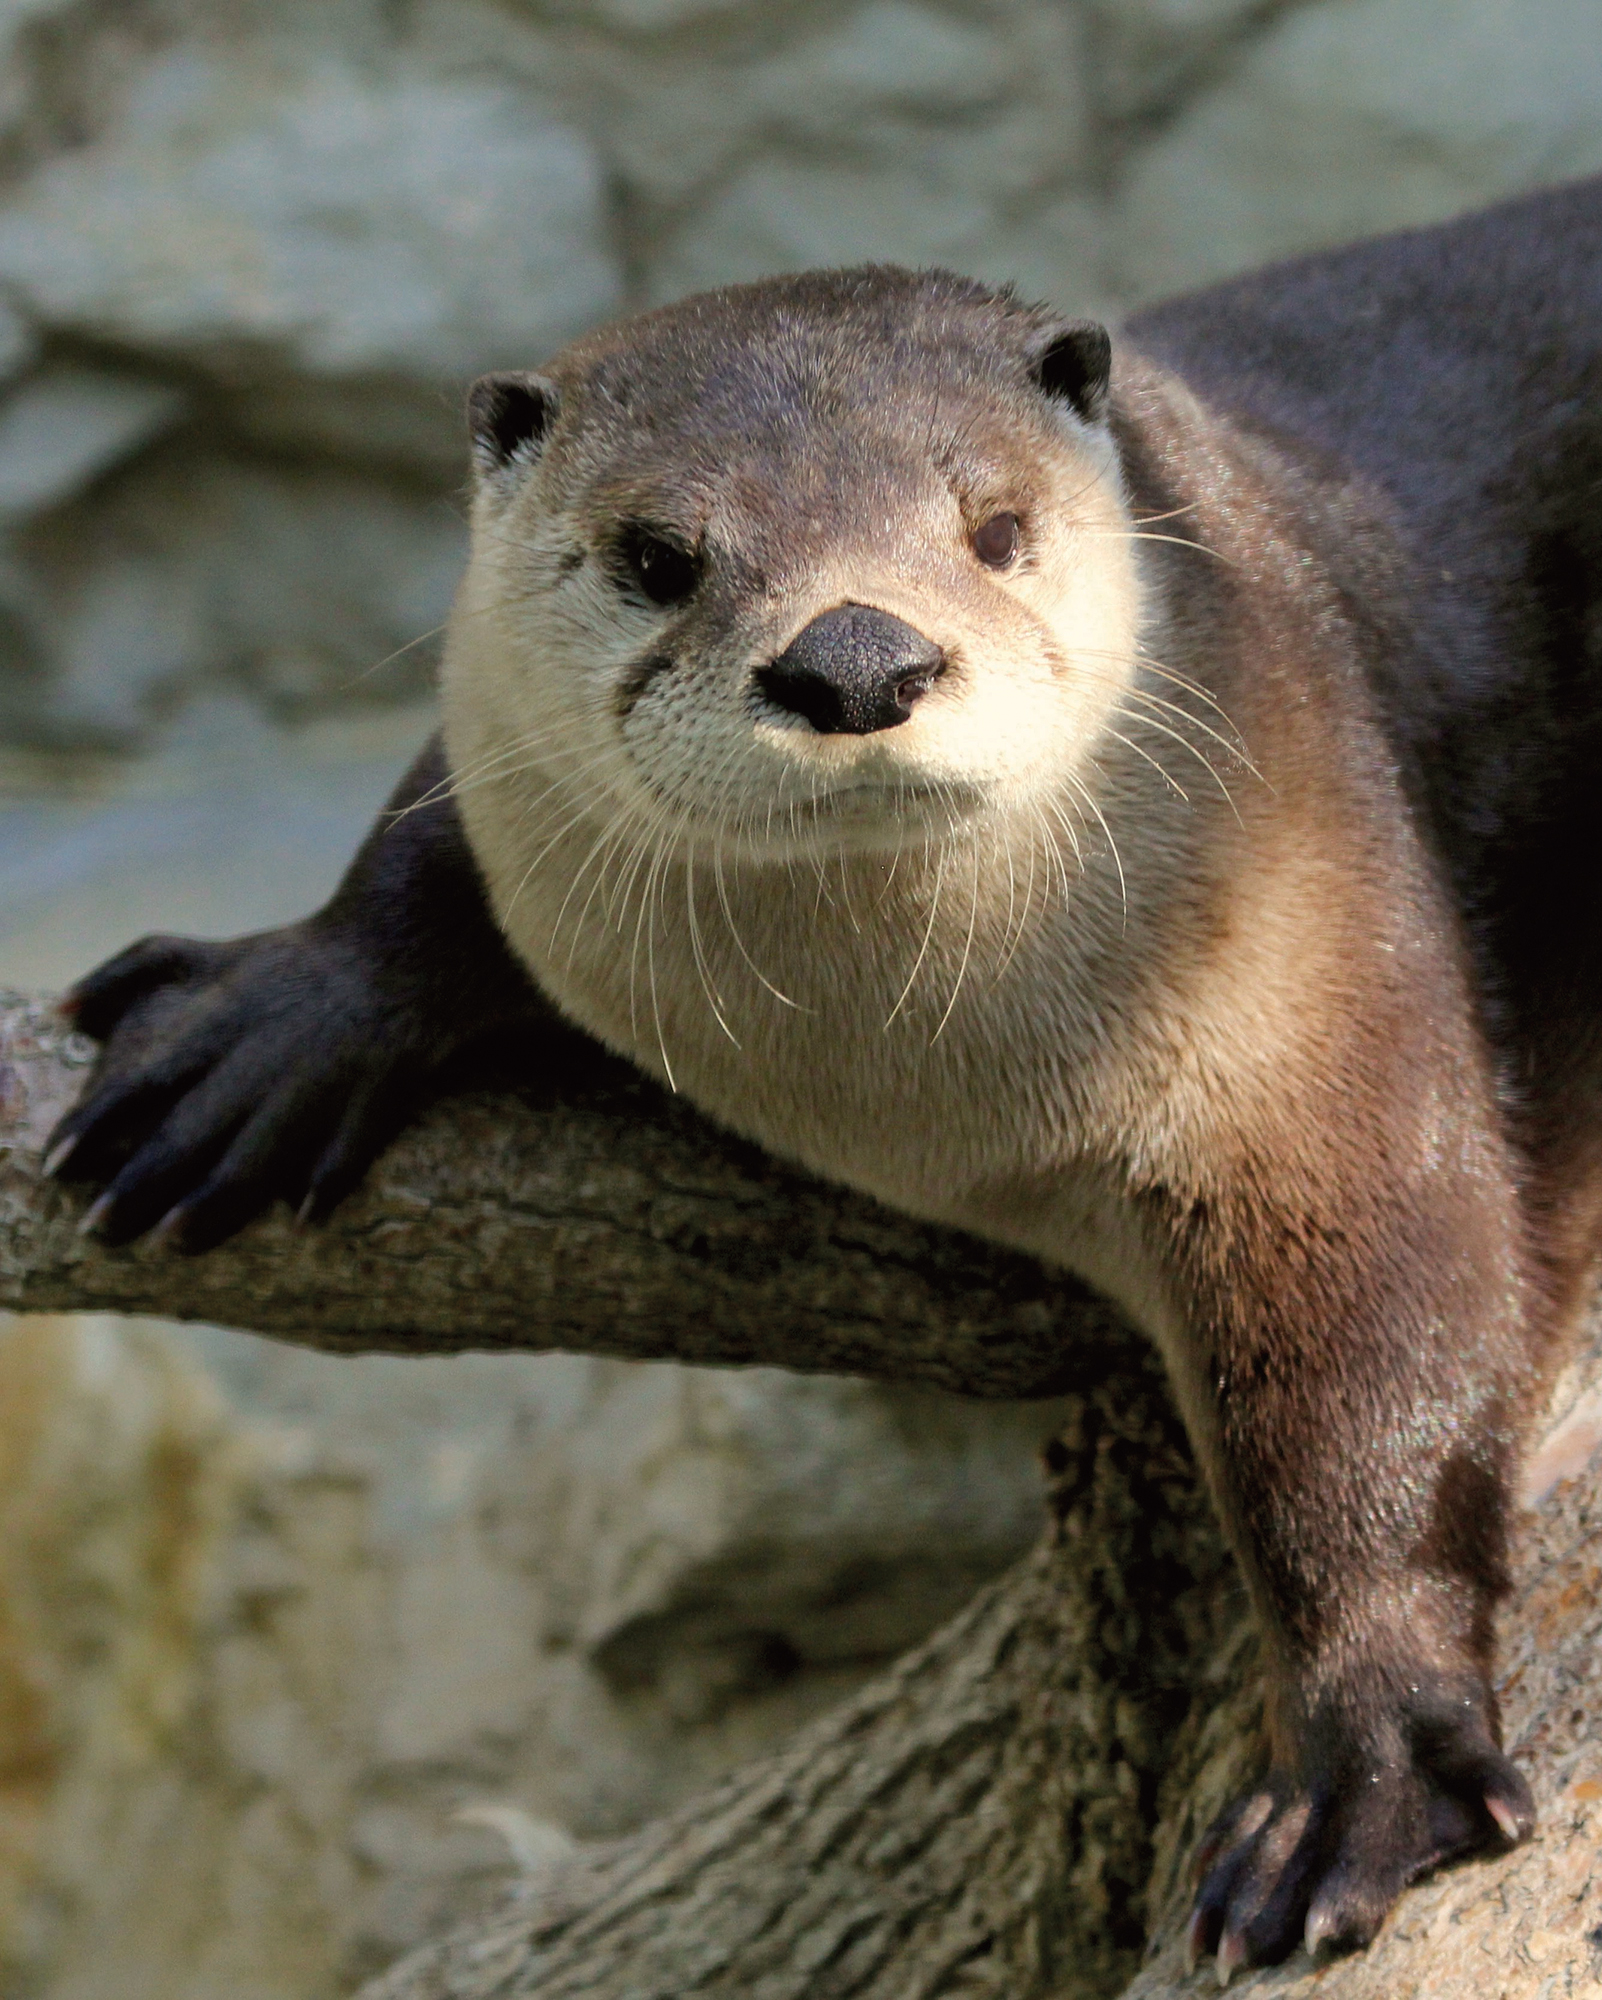 A river otter stands on a tree branch.